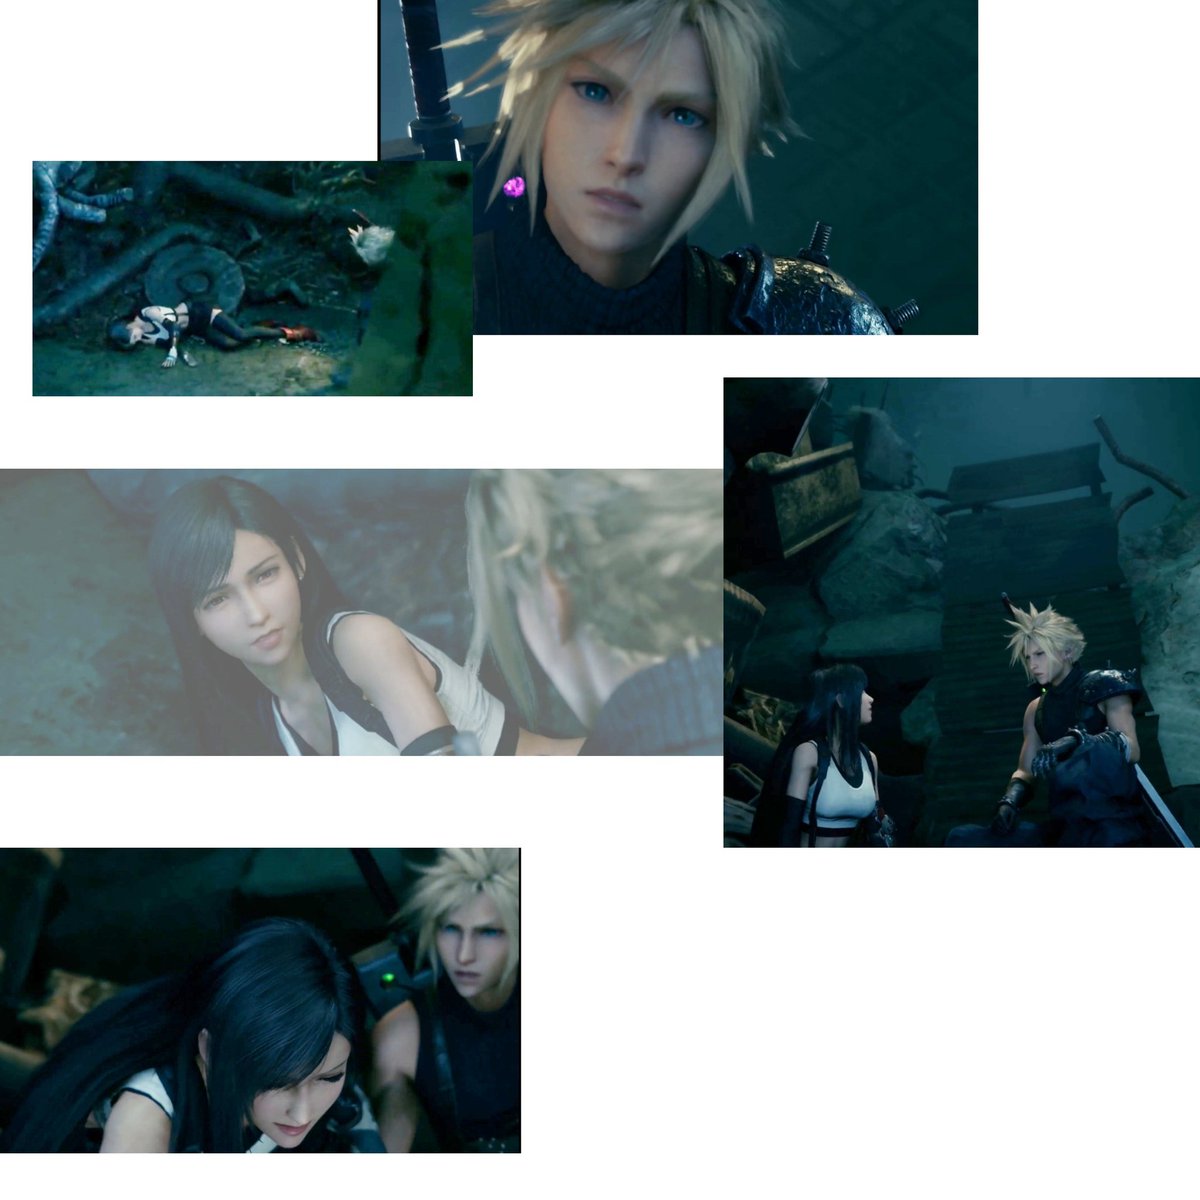 Cloud stares at Tifa wholeheartedly in the second pic while Barret is nowhere. You can't find their little interaction in OG cuz they woke up on their own and yeah there's three of them in one frame. Barret included